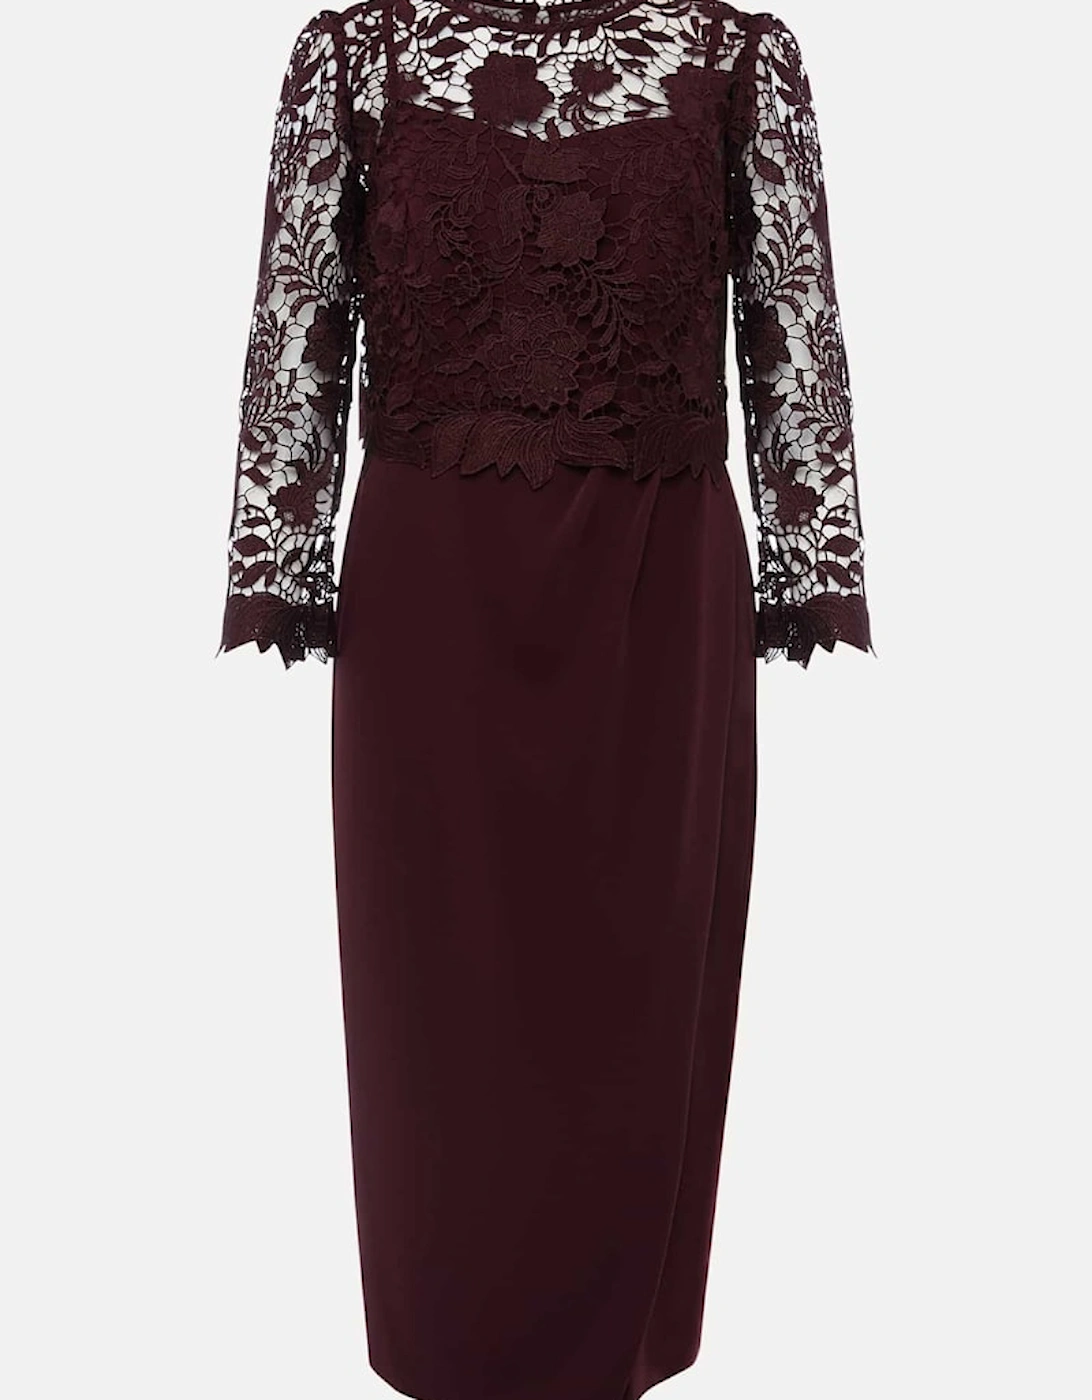 Adeline Double Layer Lace Dress